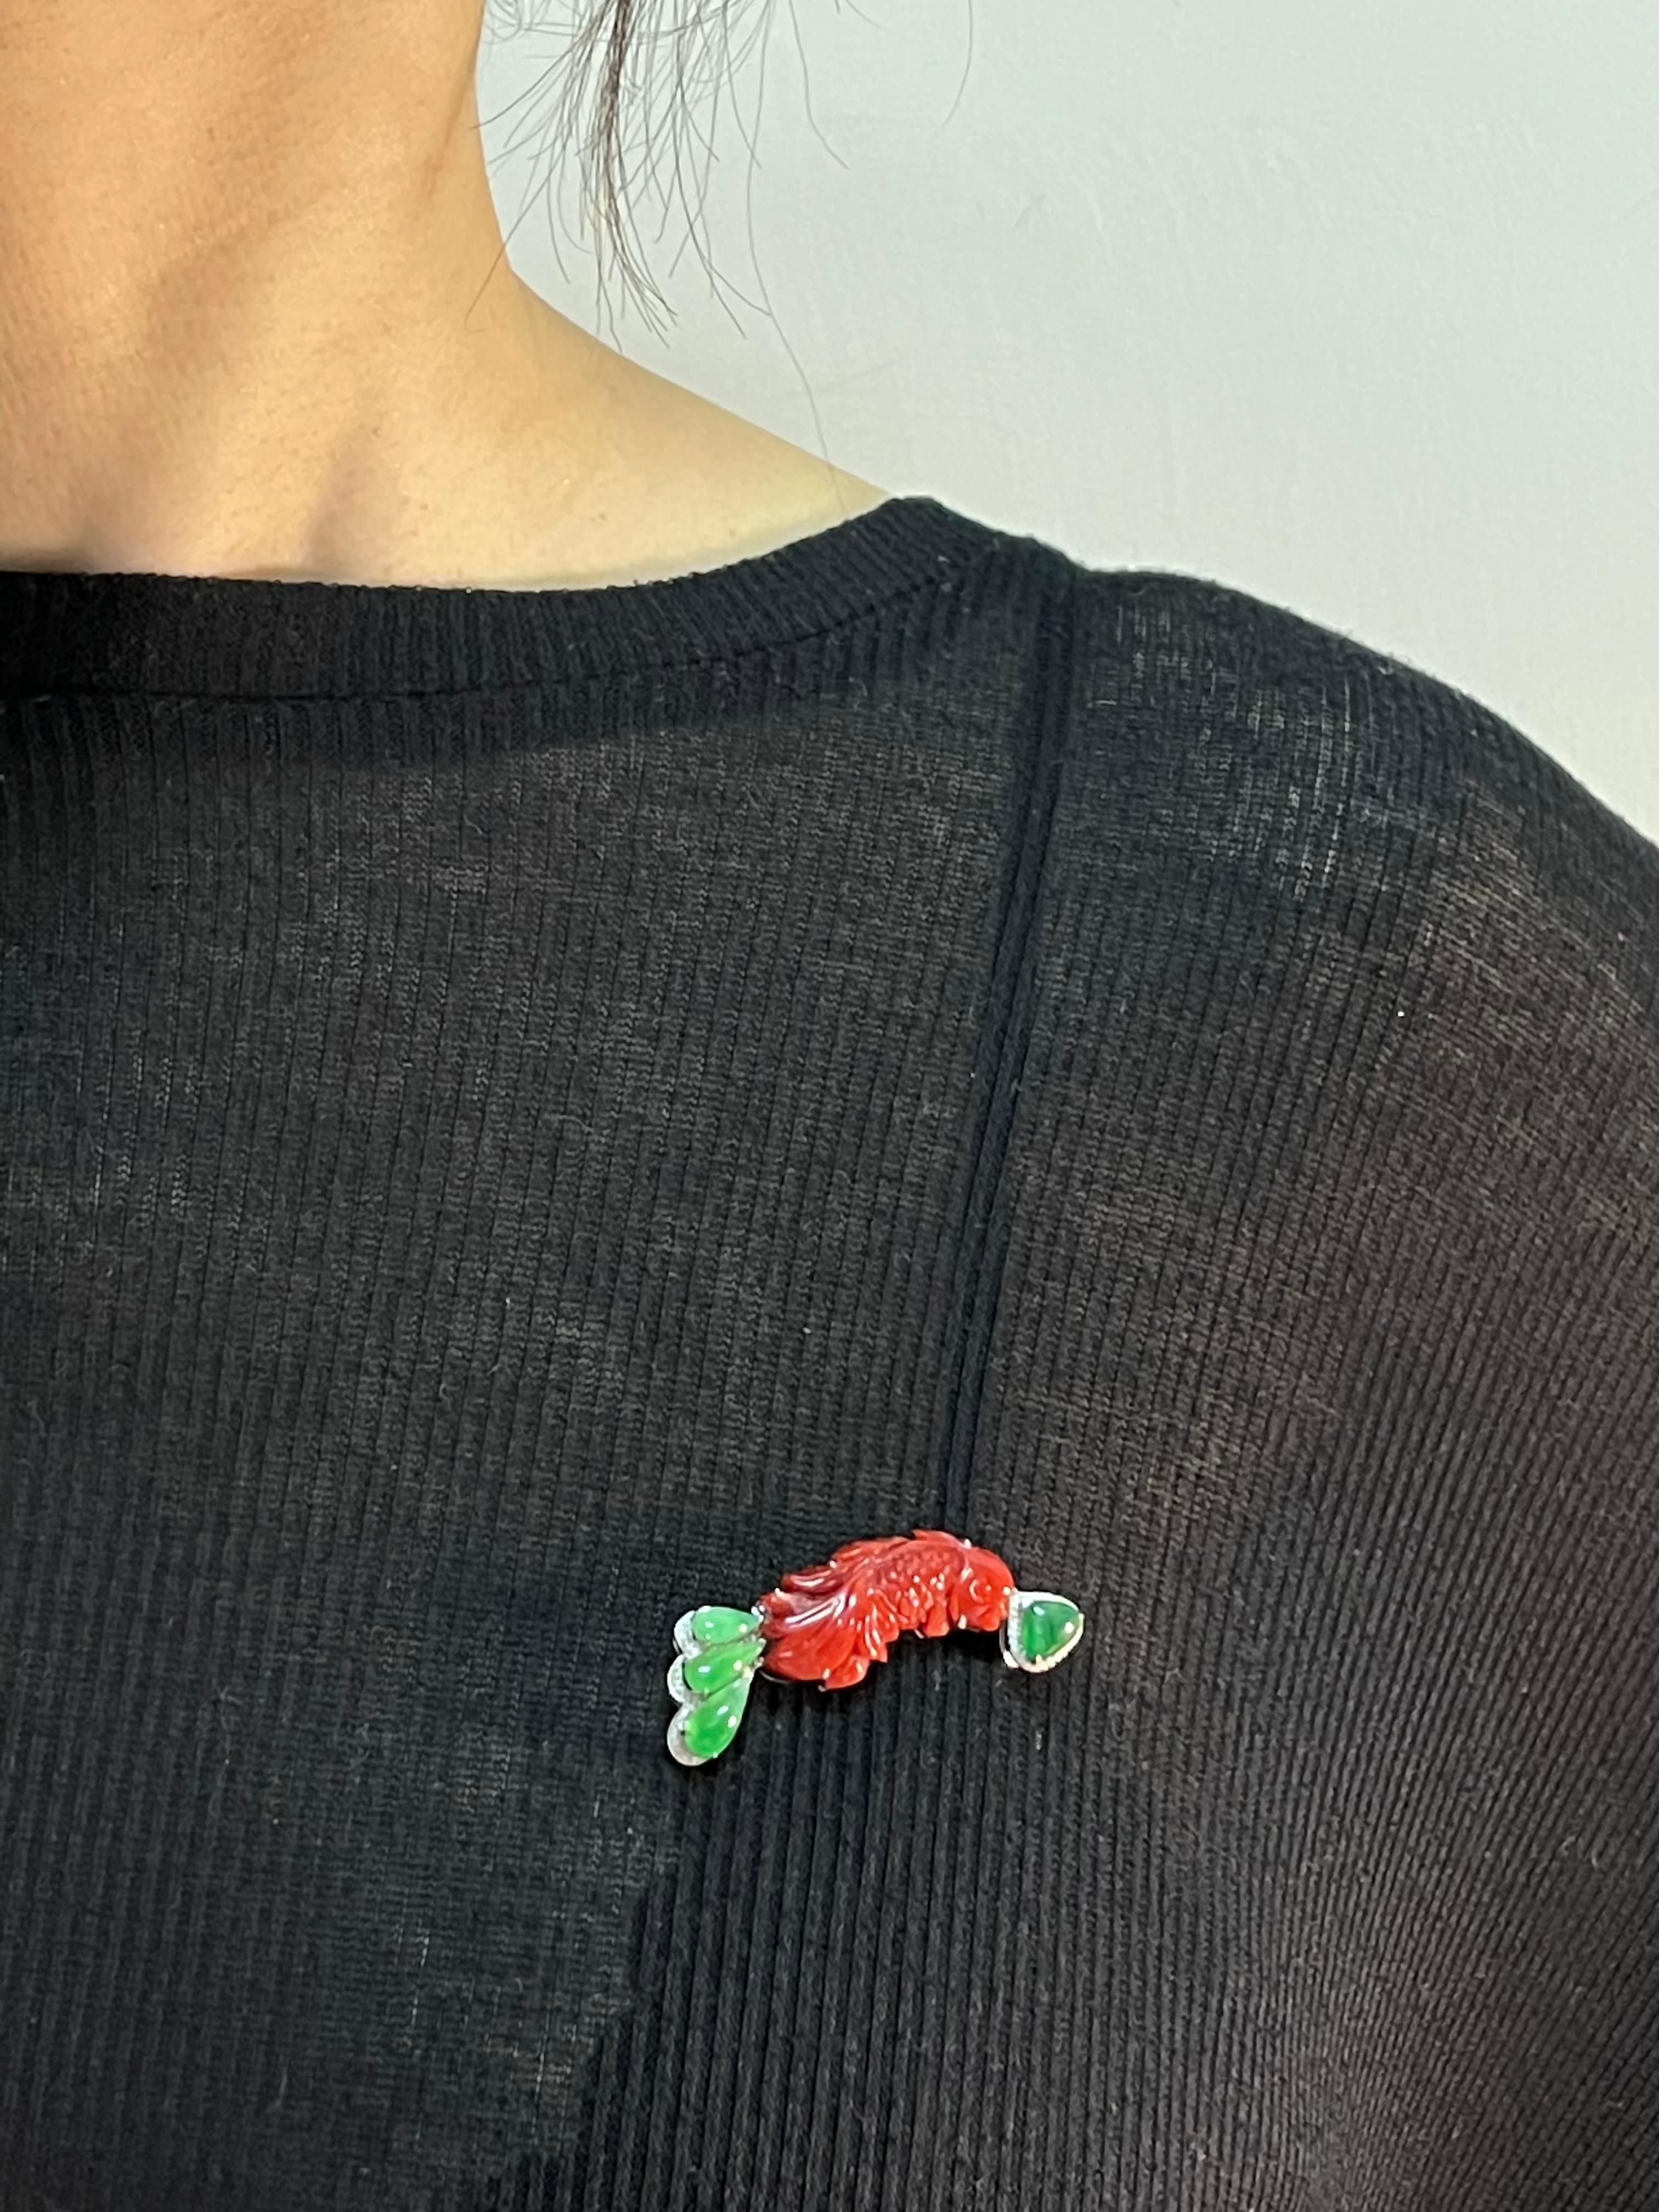 Please check out the HD video! This item can be used as a pendant or a brooch! This is a very well carved natural red coral Koi fish matched with glowing icy apple green jade and diamonds. There are 2 certificates, one for the natural red coral and